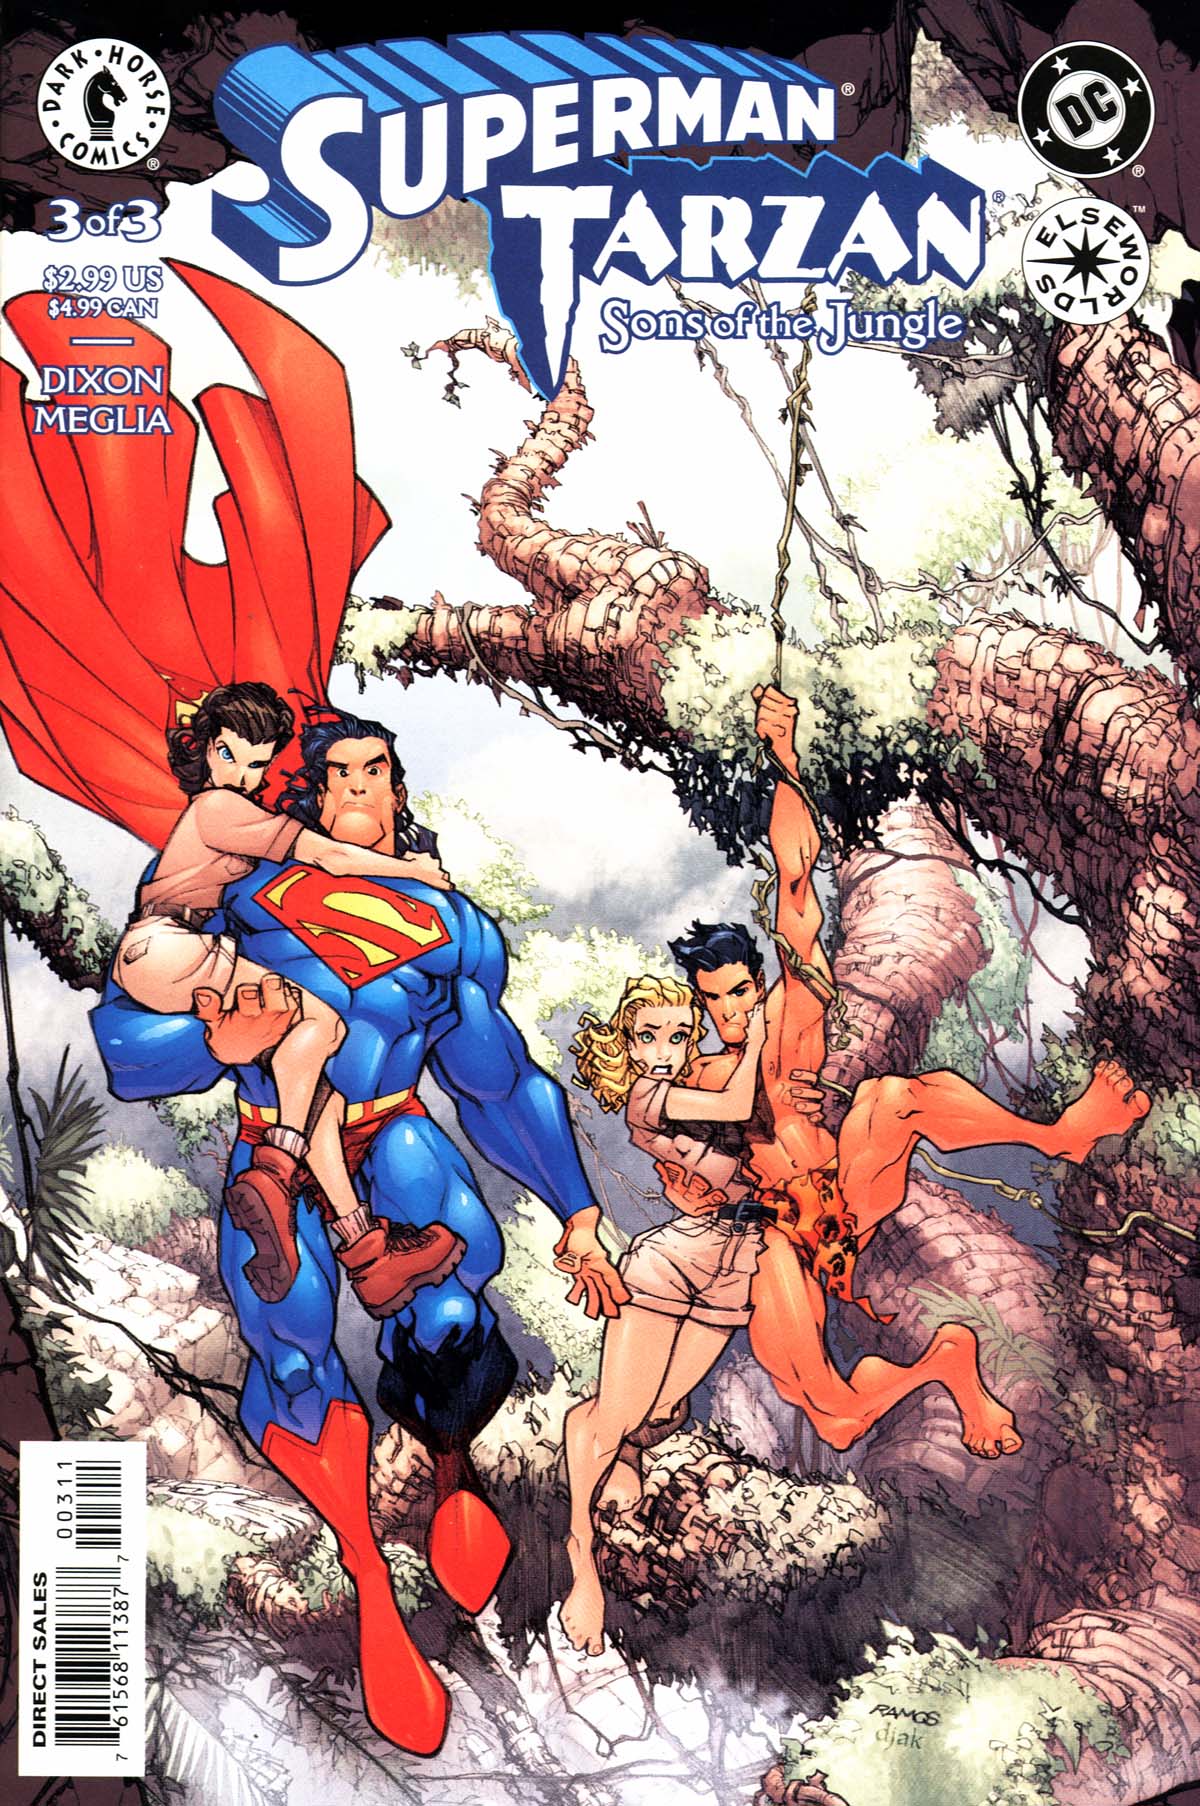 Read online Superman/Tarzan: Sons of the Jungle comic -  Issue #3 - 1